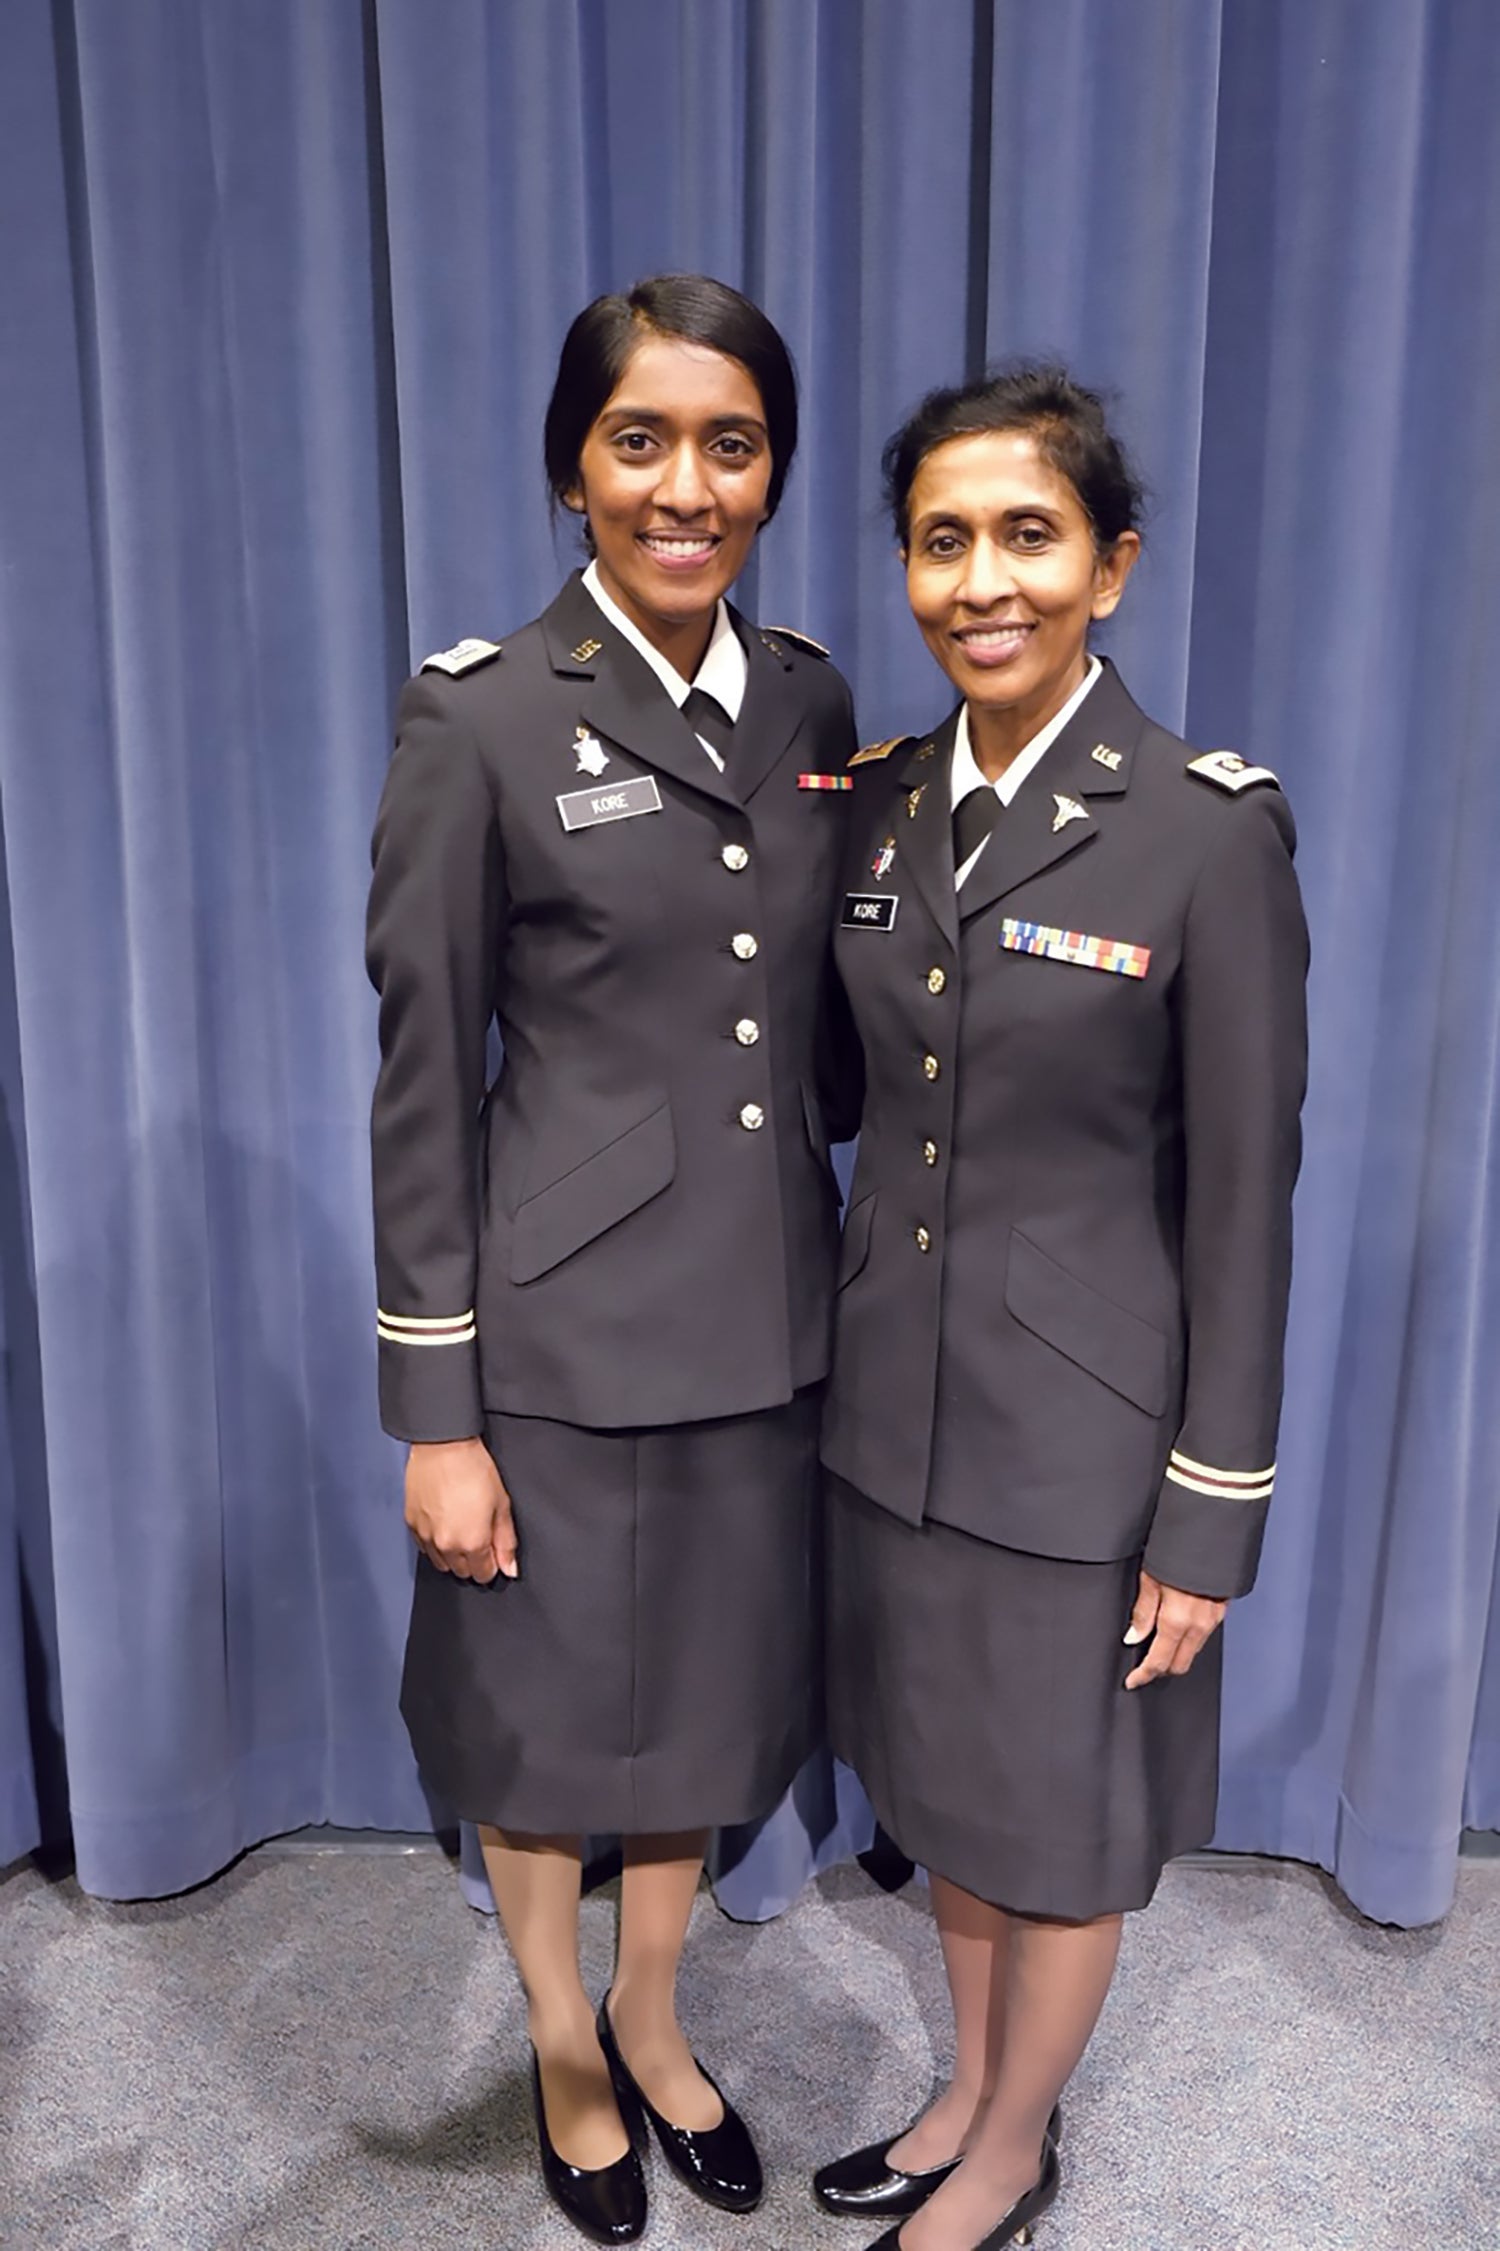 Newly commissioned Capt. Lydia Kore, left, poses for a photo with her mother, then-Maj. Doris Kore, a member of the U.S. Army Reserve, in 2019. (Credit: courtesy photo)